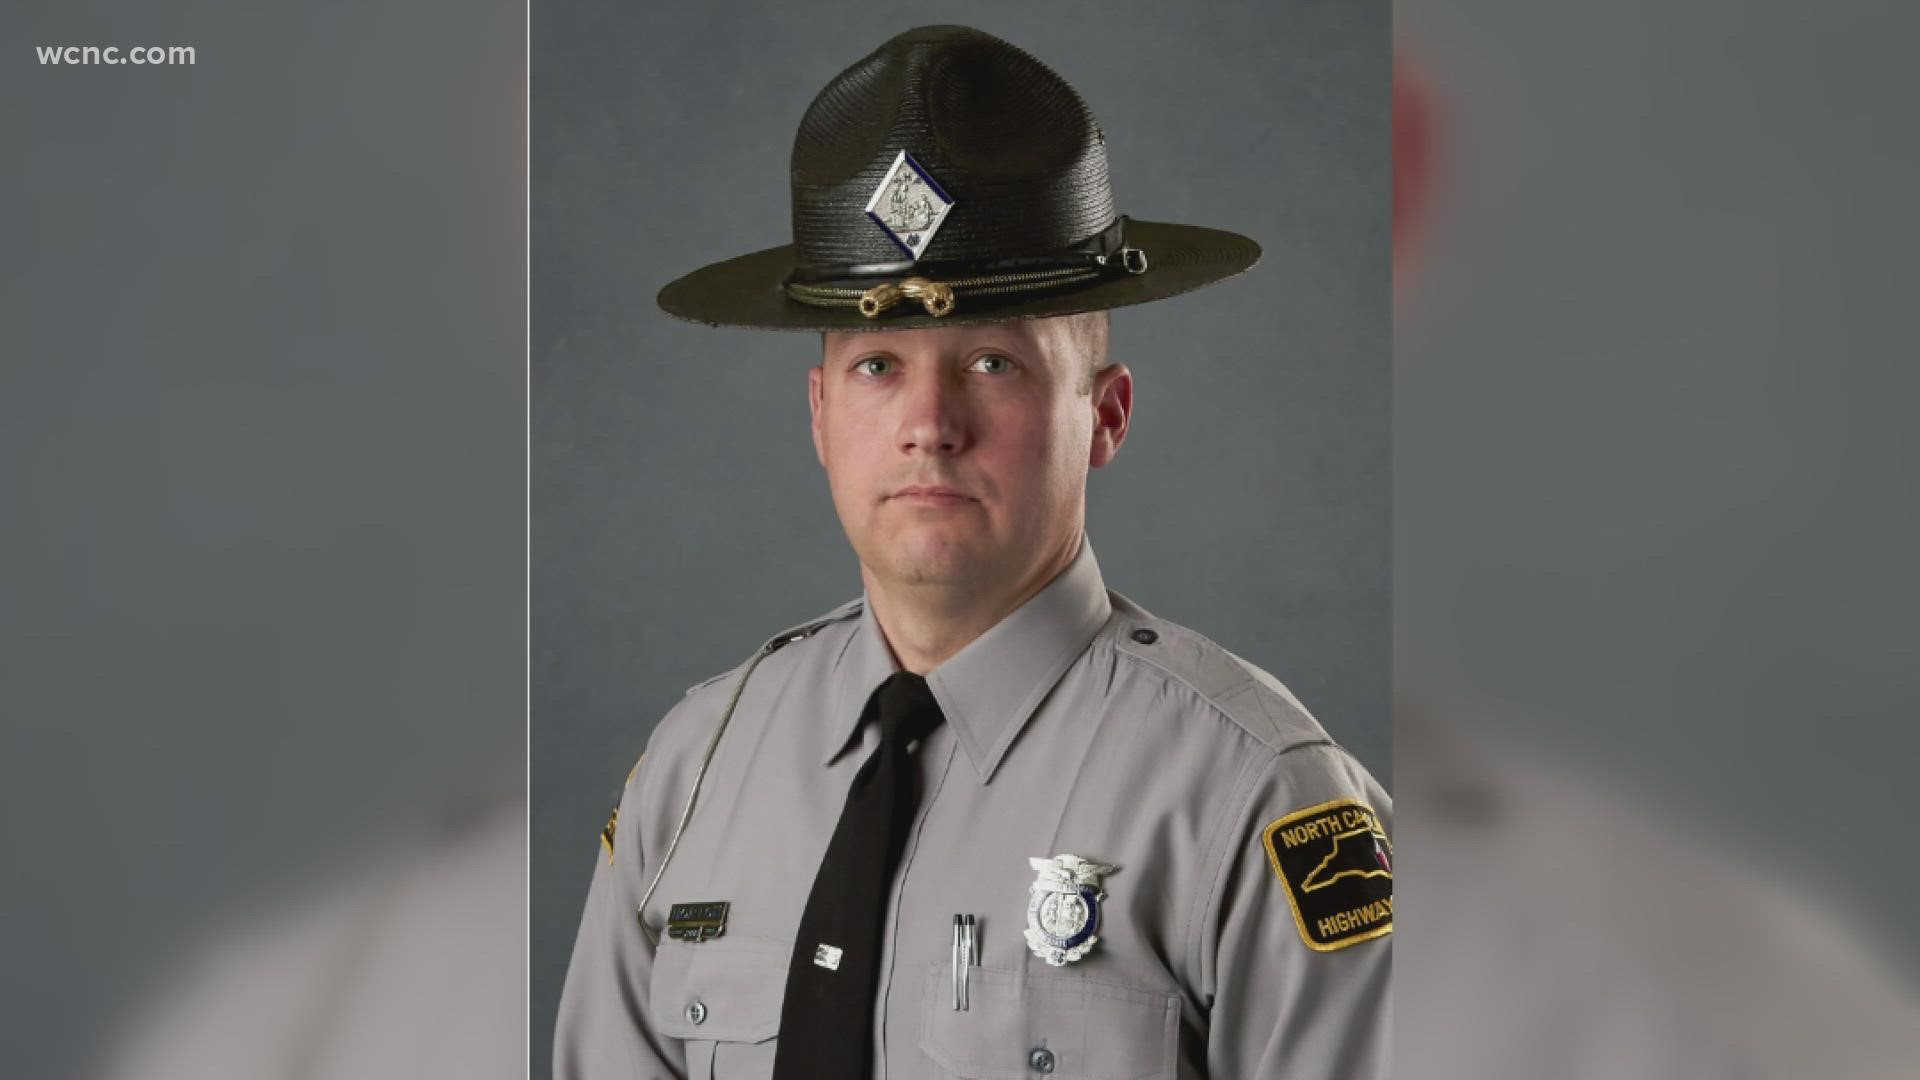 Officials say Trooper John Horton died after his brother and fellow officer Trooper James Horton lost control of his car and hit him.